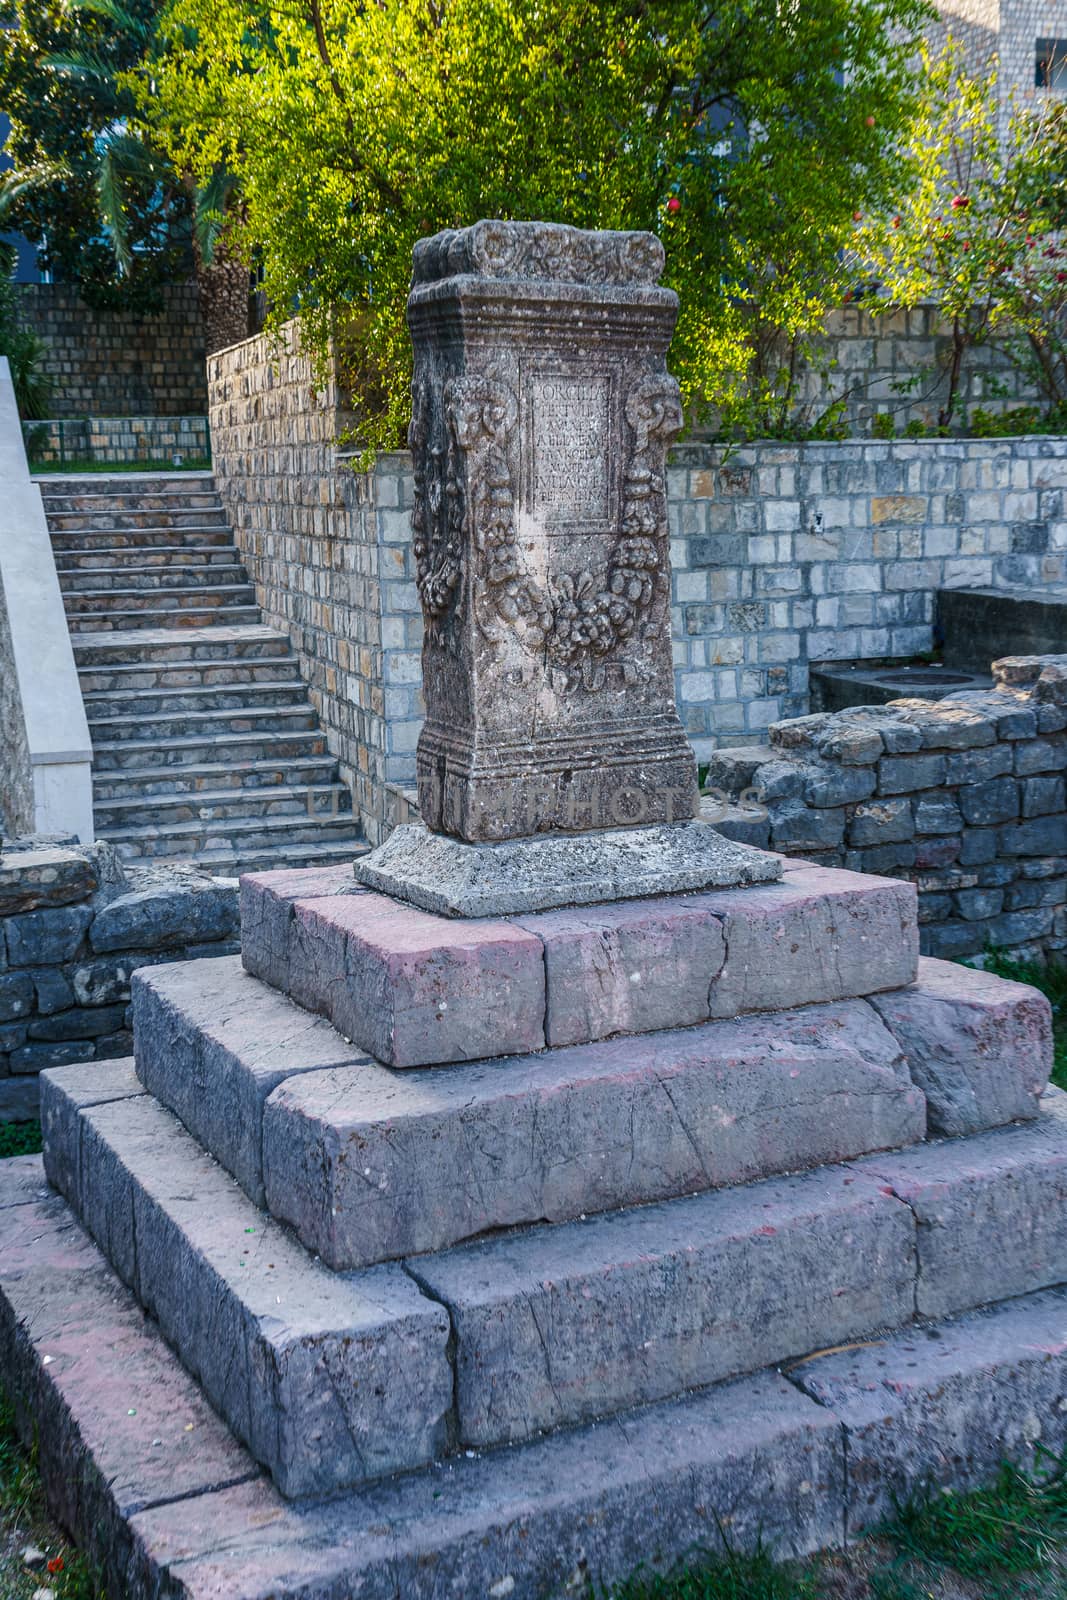 Architecture of the Balkan countries. The remains of ancient stone structures in the city of Budva, in Montenegro.